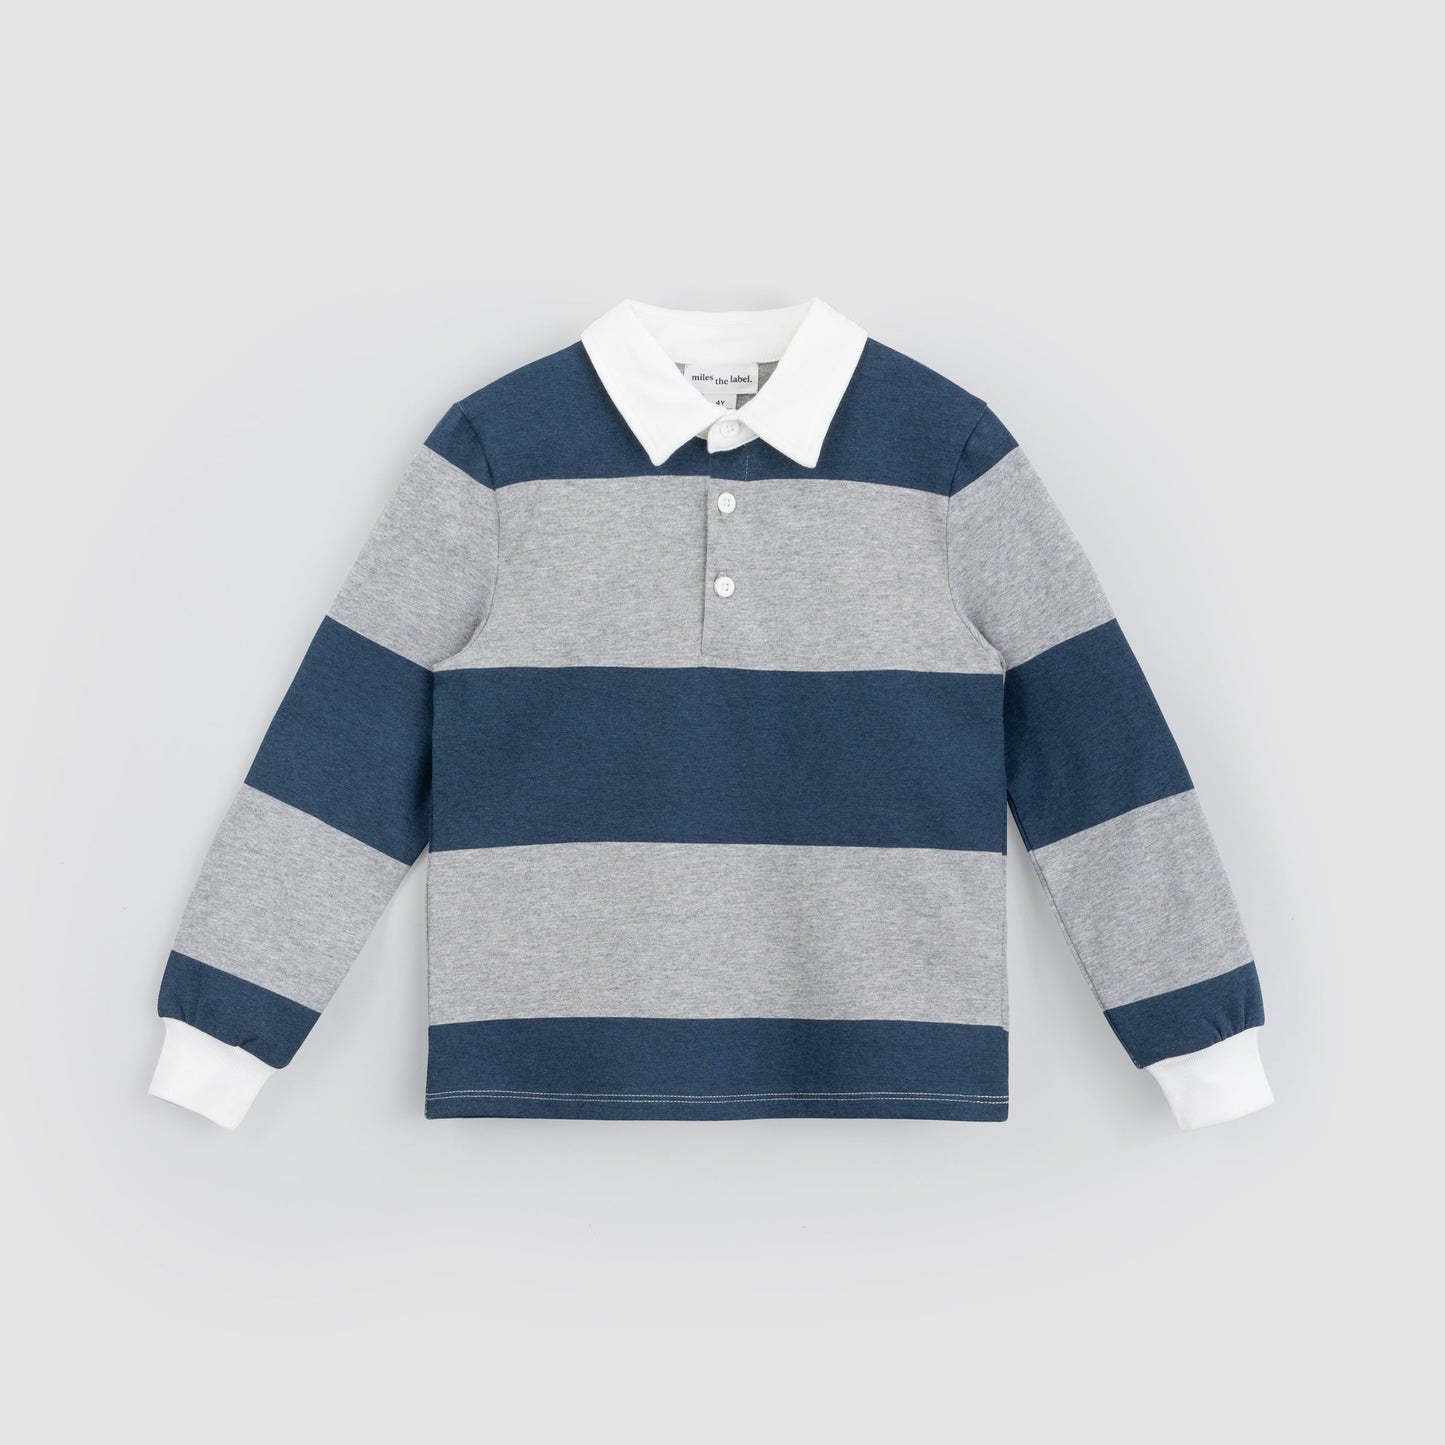 Miles the Label boys long sleeve rugby shirt